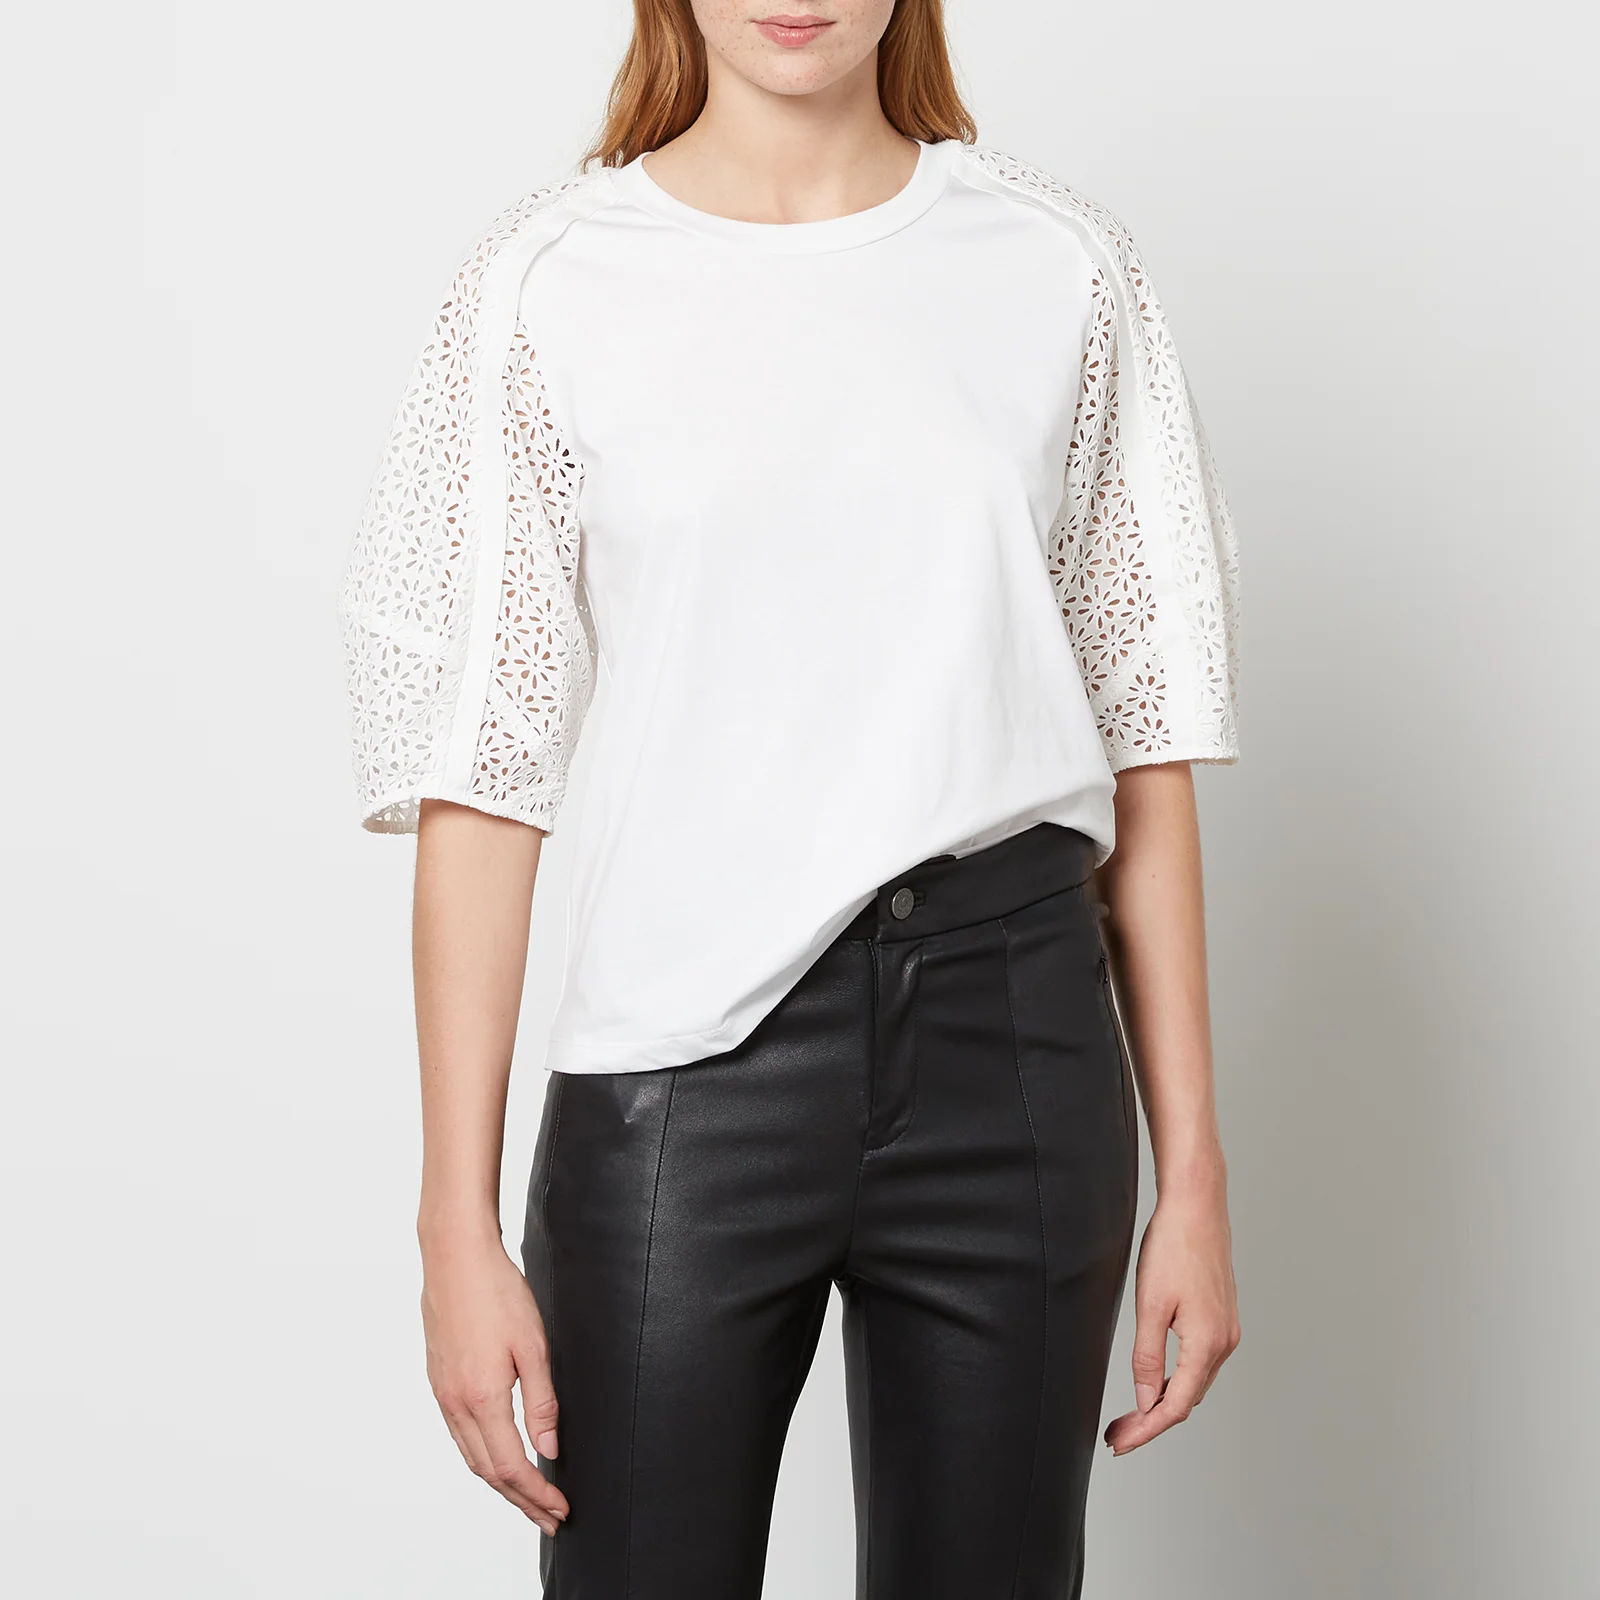 3.1 Phillip Lim Women's Broderie Anglaise T Shirt - White Image 1